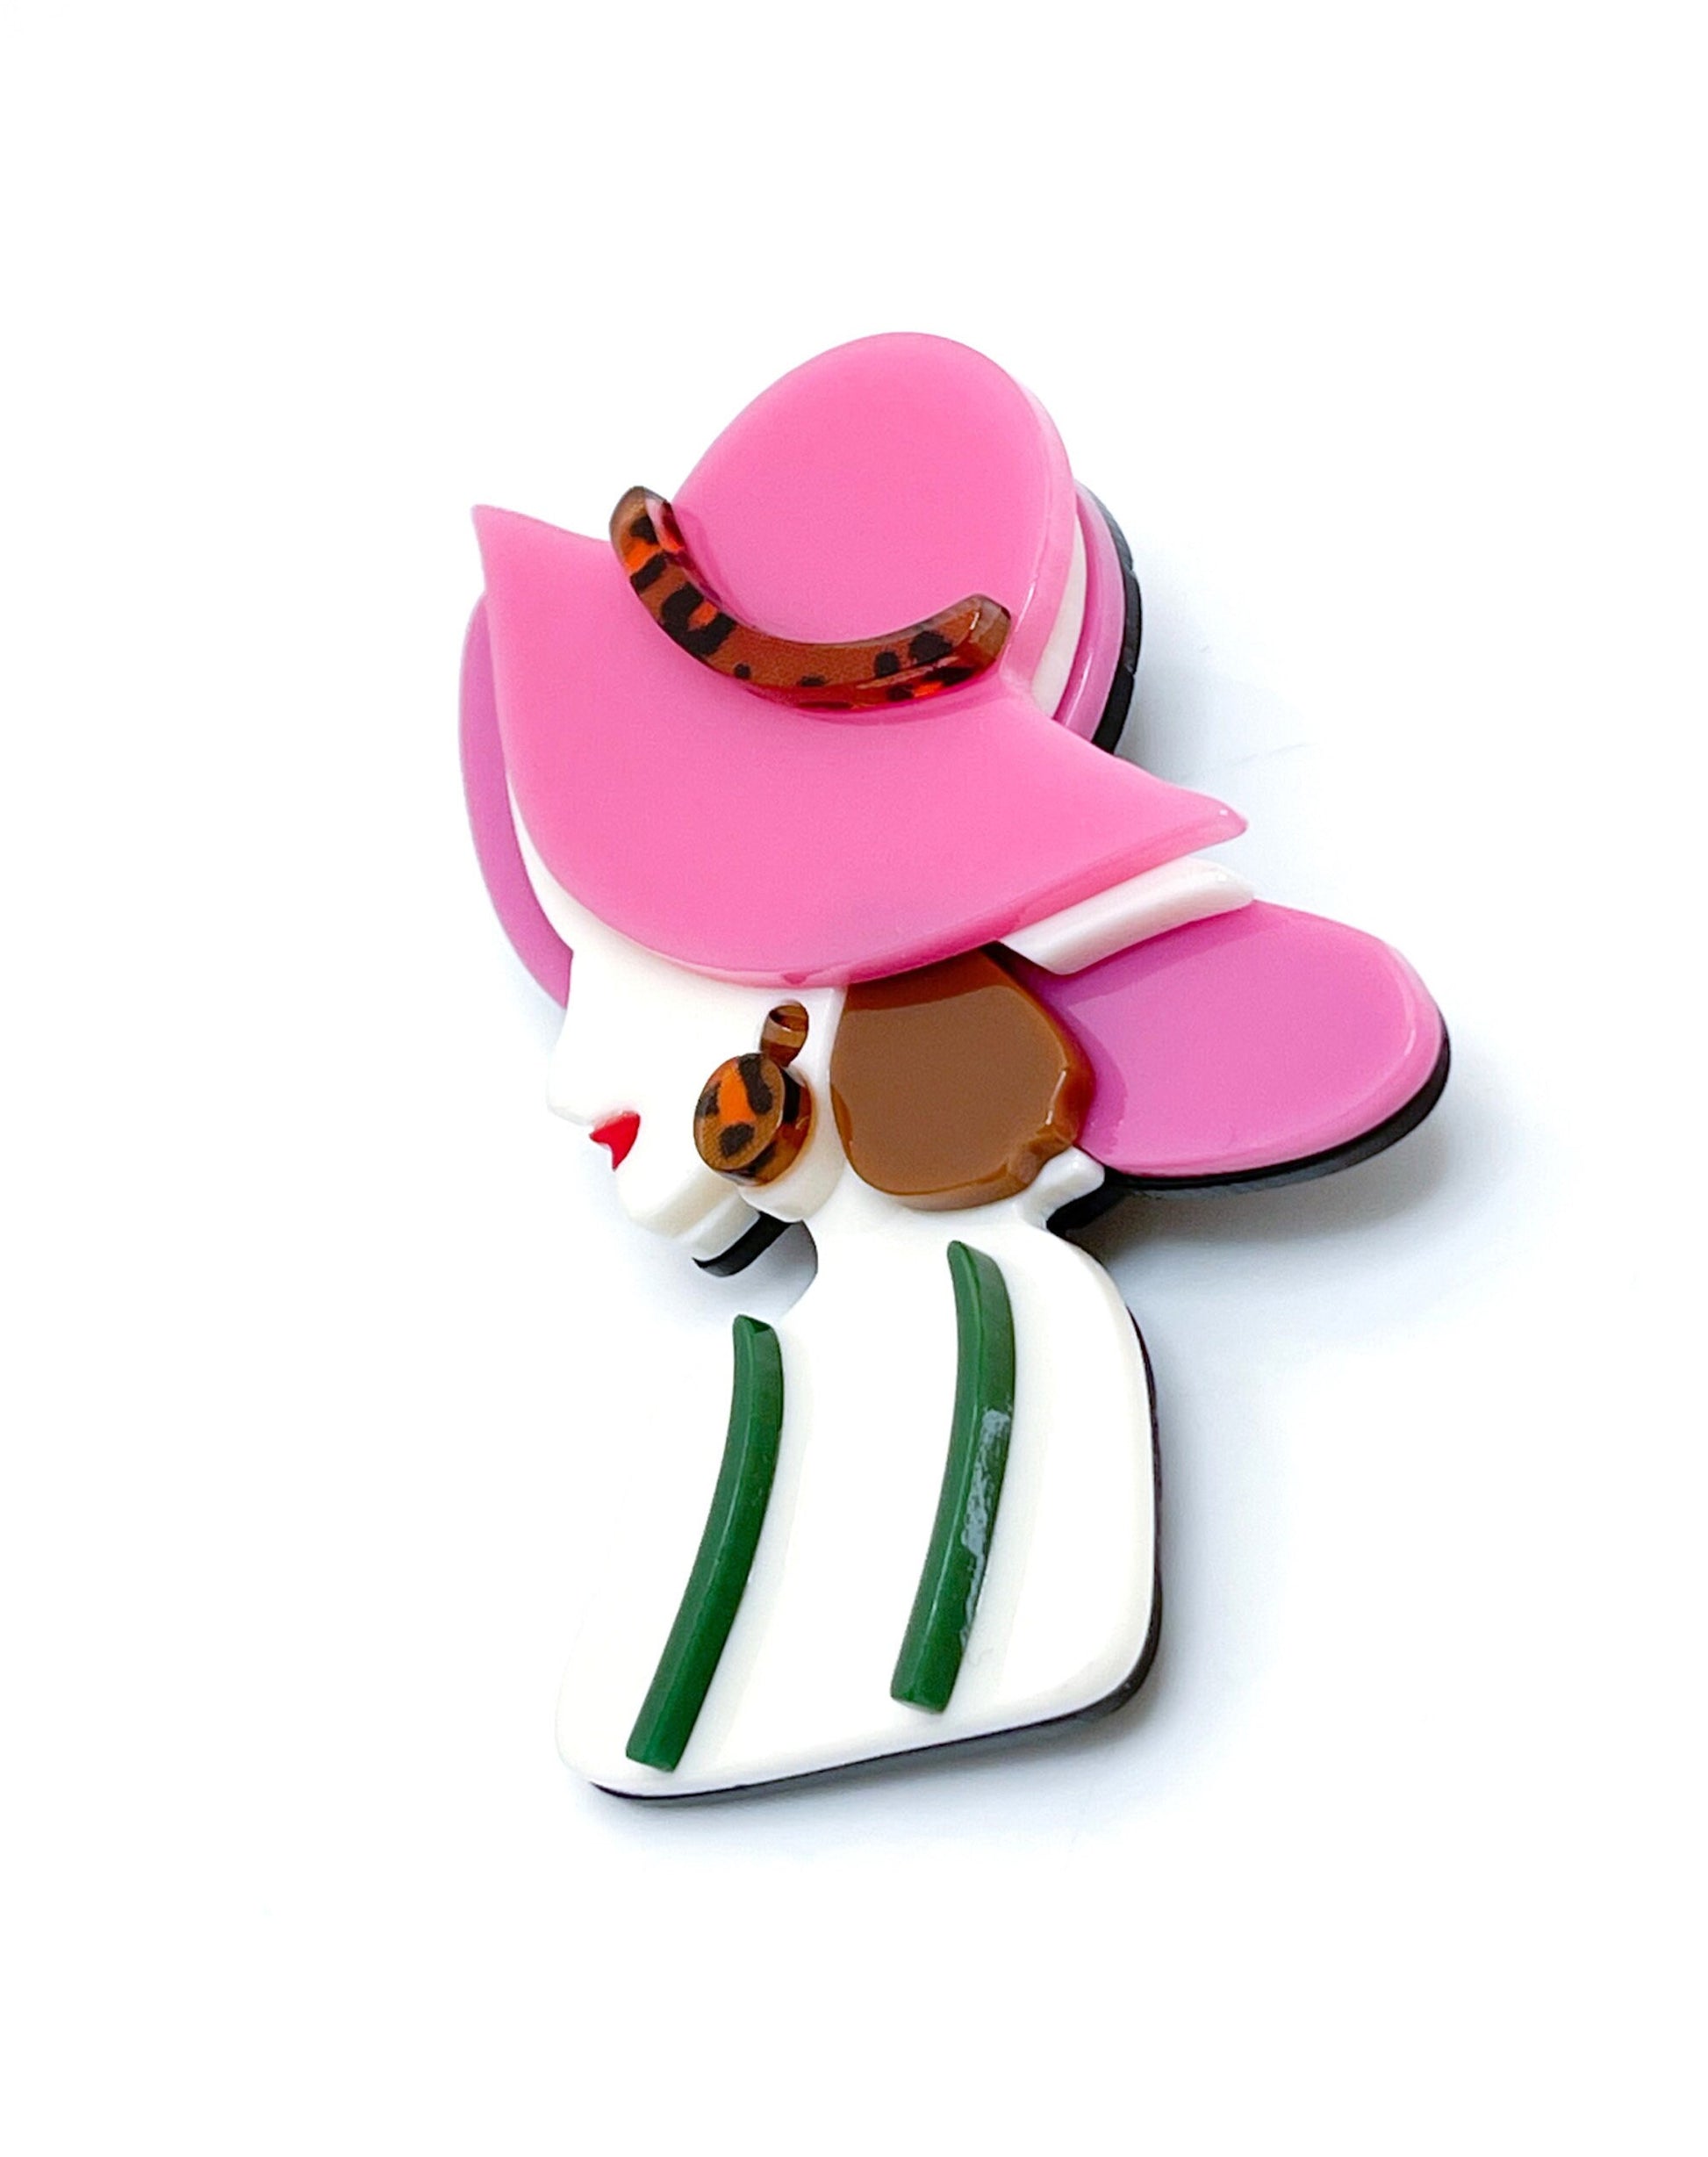 Large Lady in a Pink Sunhat Brooch, Stylish Lady Pin, Fashion Pin for Jacket Scarf, Head and Shoulders Lady Pin, Brooches For Women